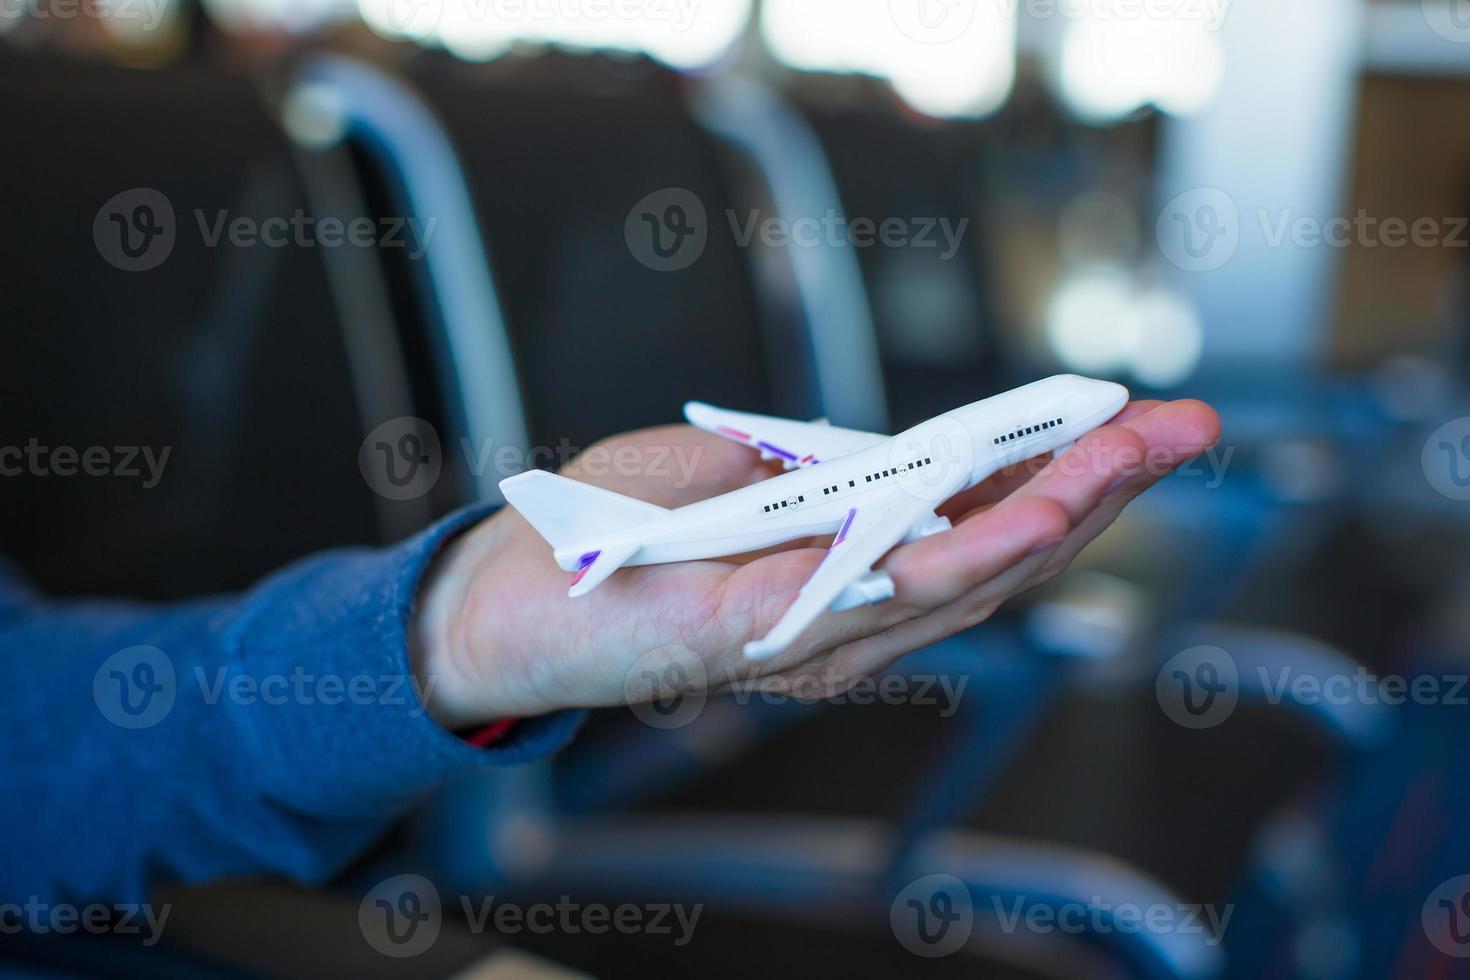 Small airplane model on male hand inside a large aircraft photo